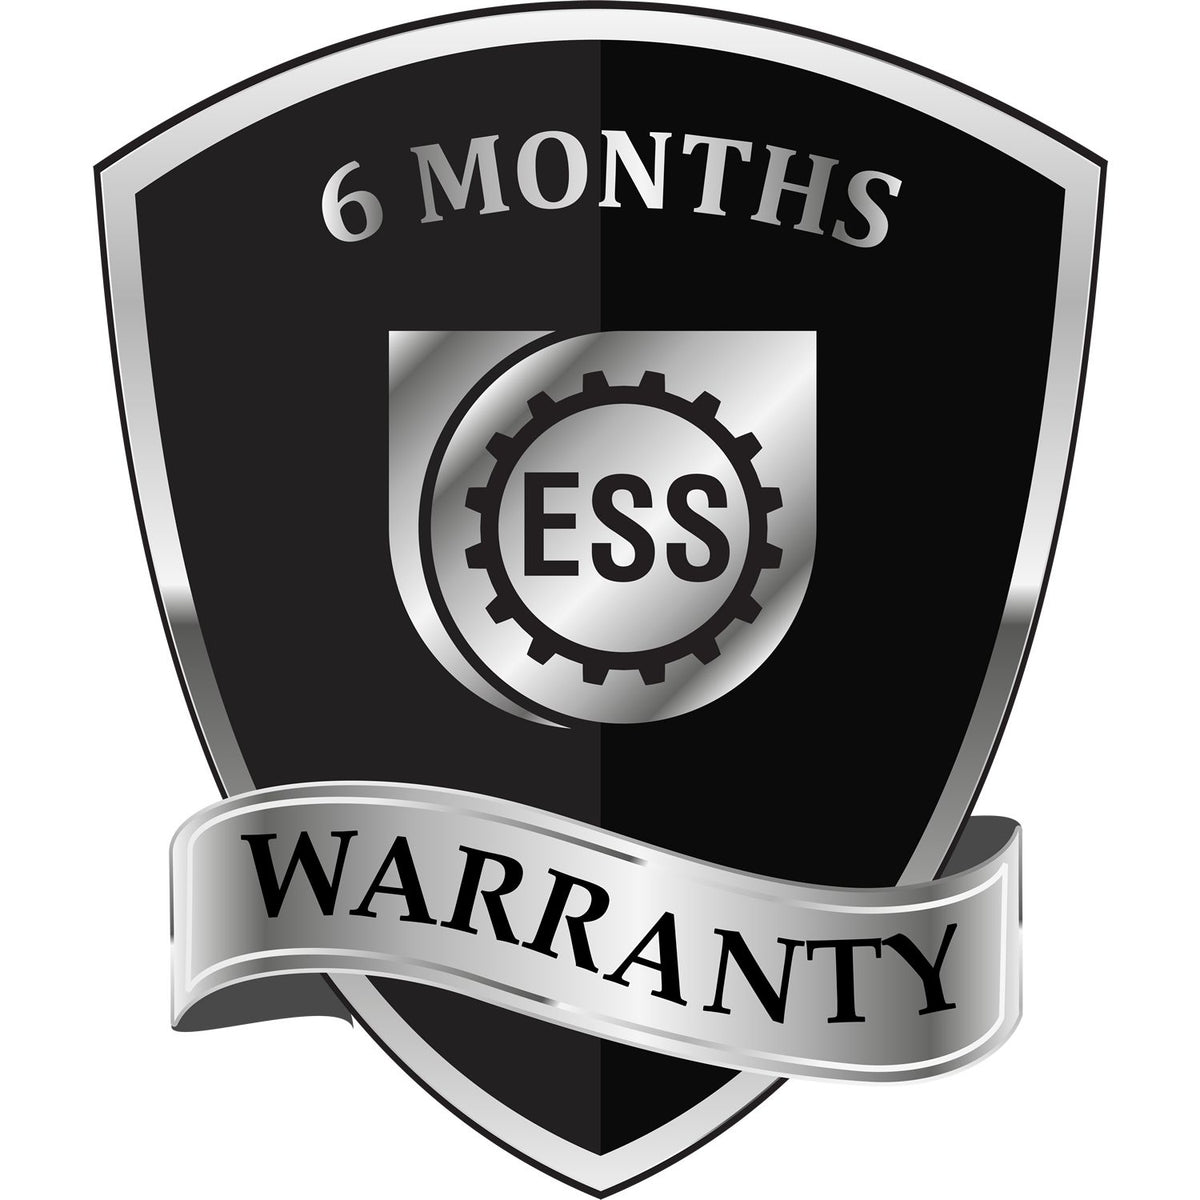 A badge or emblem showing a warranty icon for the Premium MaxLight Pre-Inked Kansas Landscape Architectural Stamp